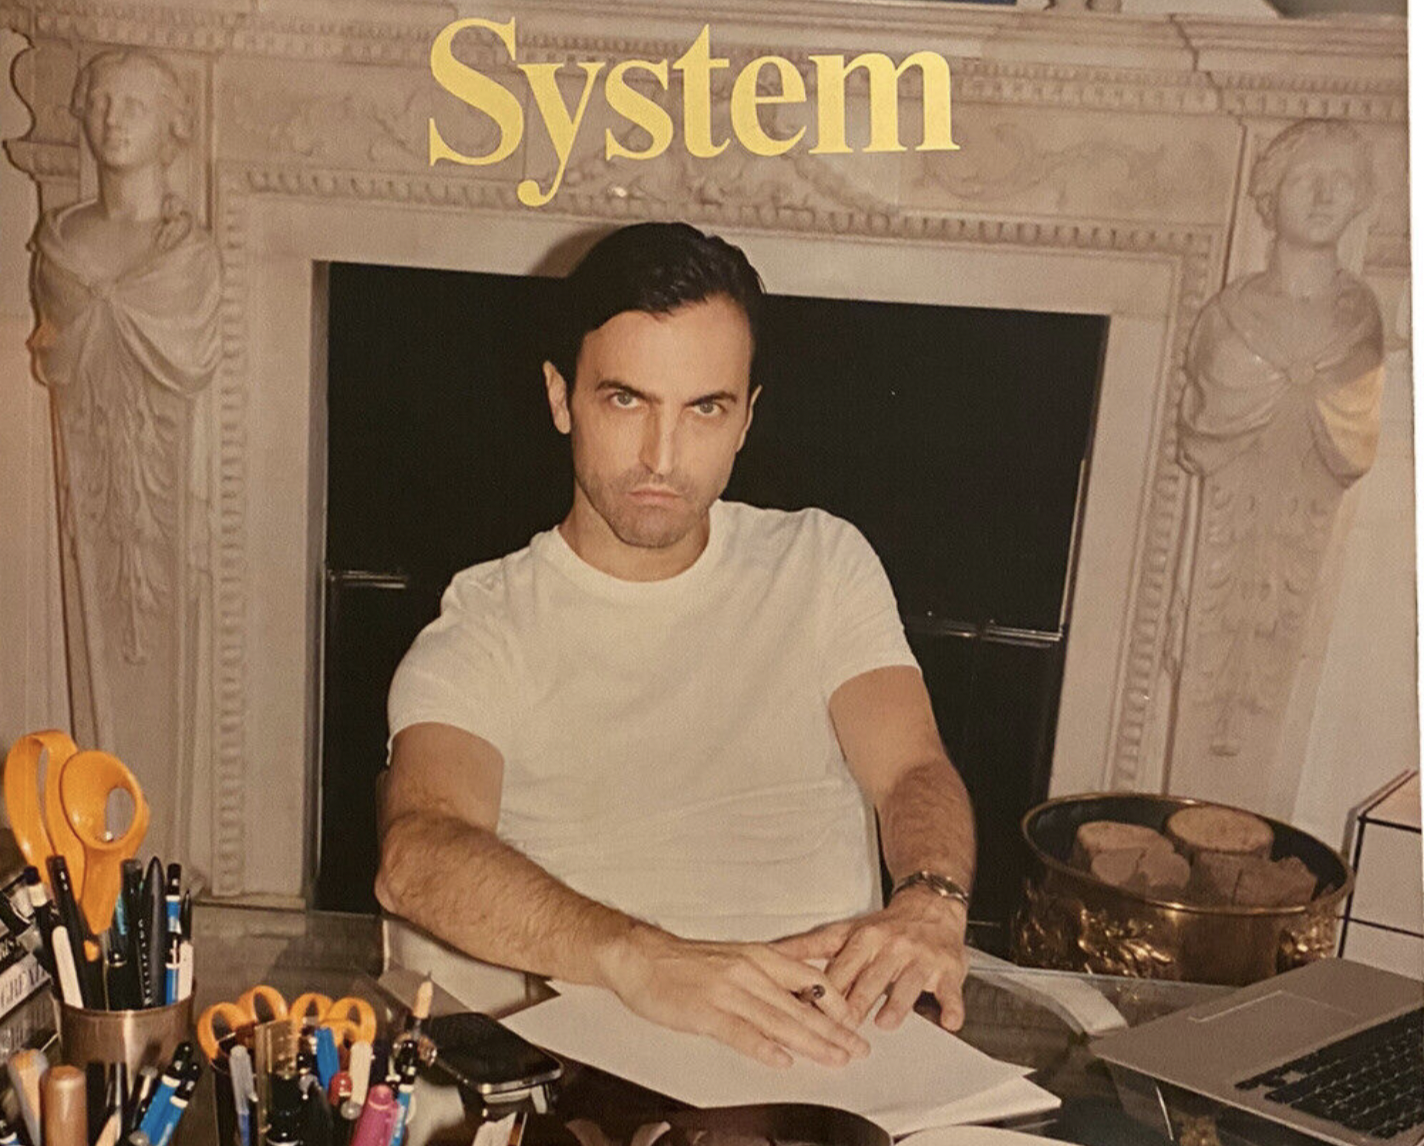 Ghesquiere Speaks About Balenciaga, Years After Kering Lawsuit